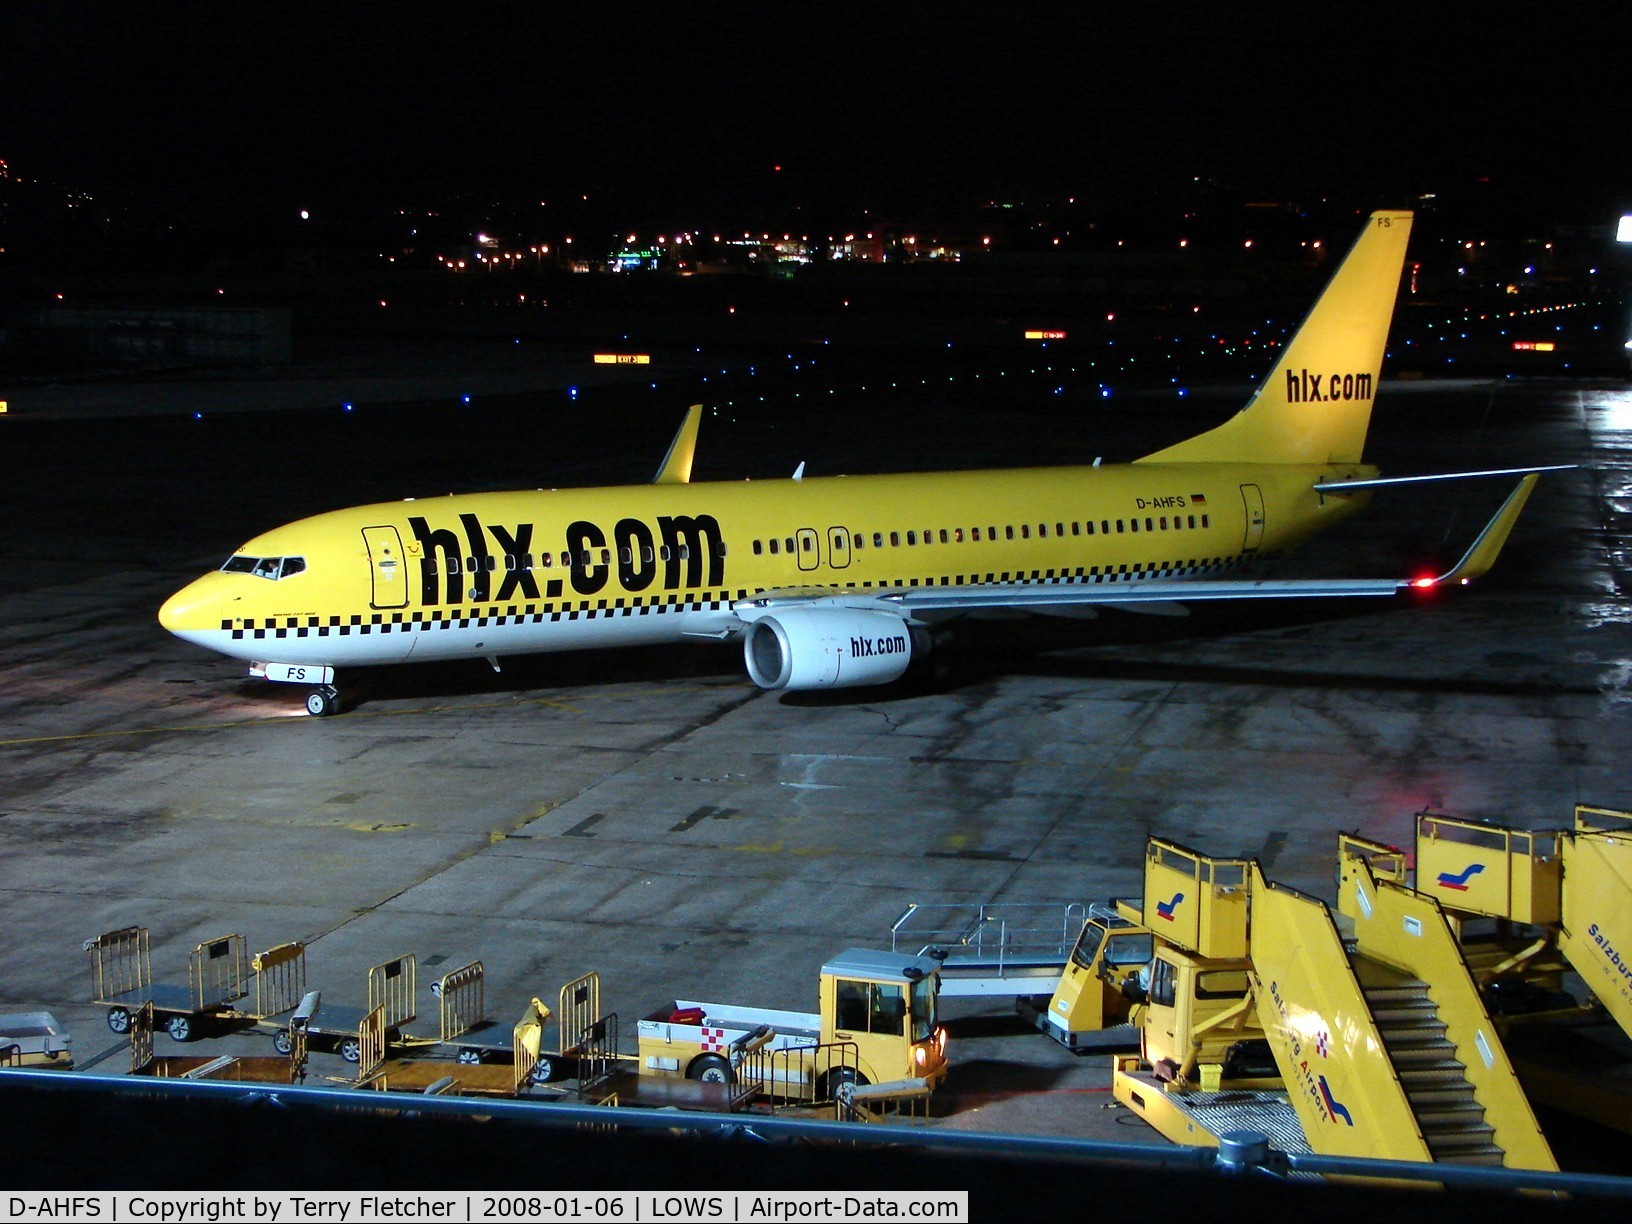 D-AHFS, 2000 Boeing 737-8K5 C/N 28623, This colour scheme looks good , even at 10 o'clock at night !!